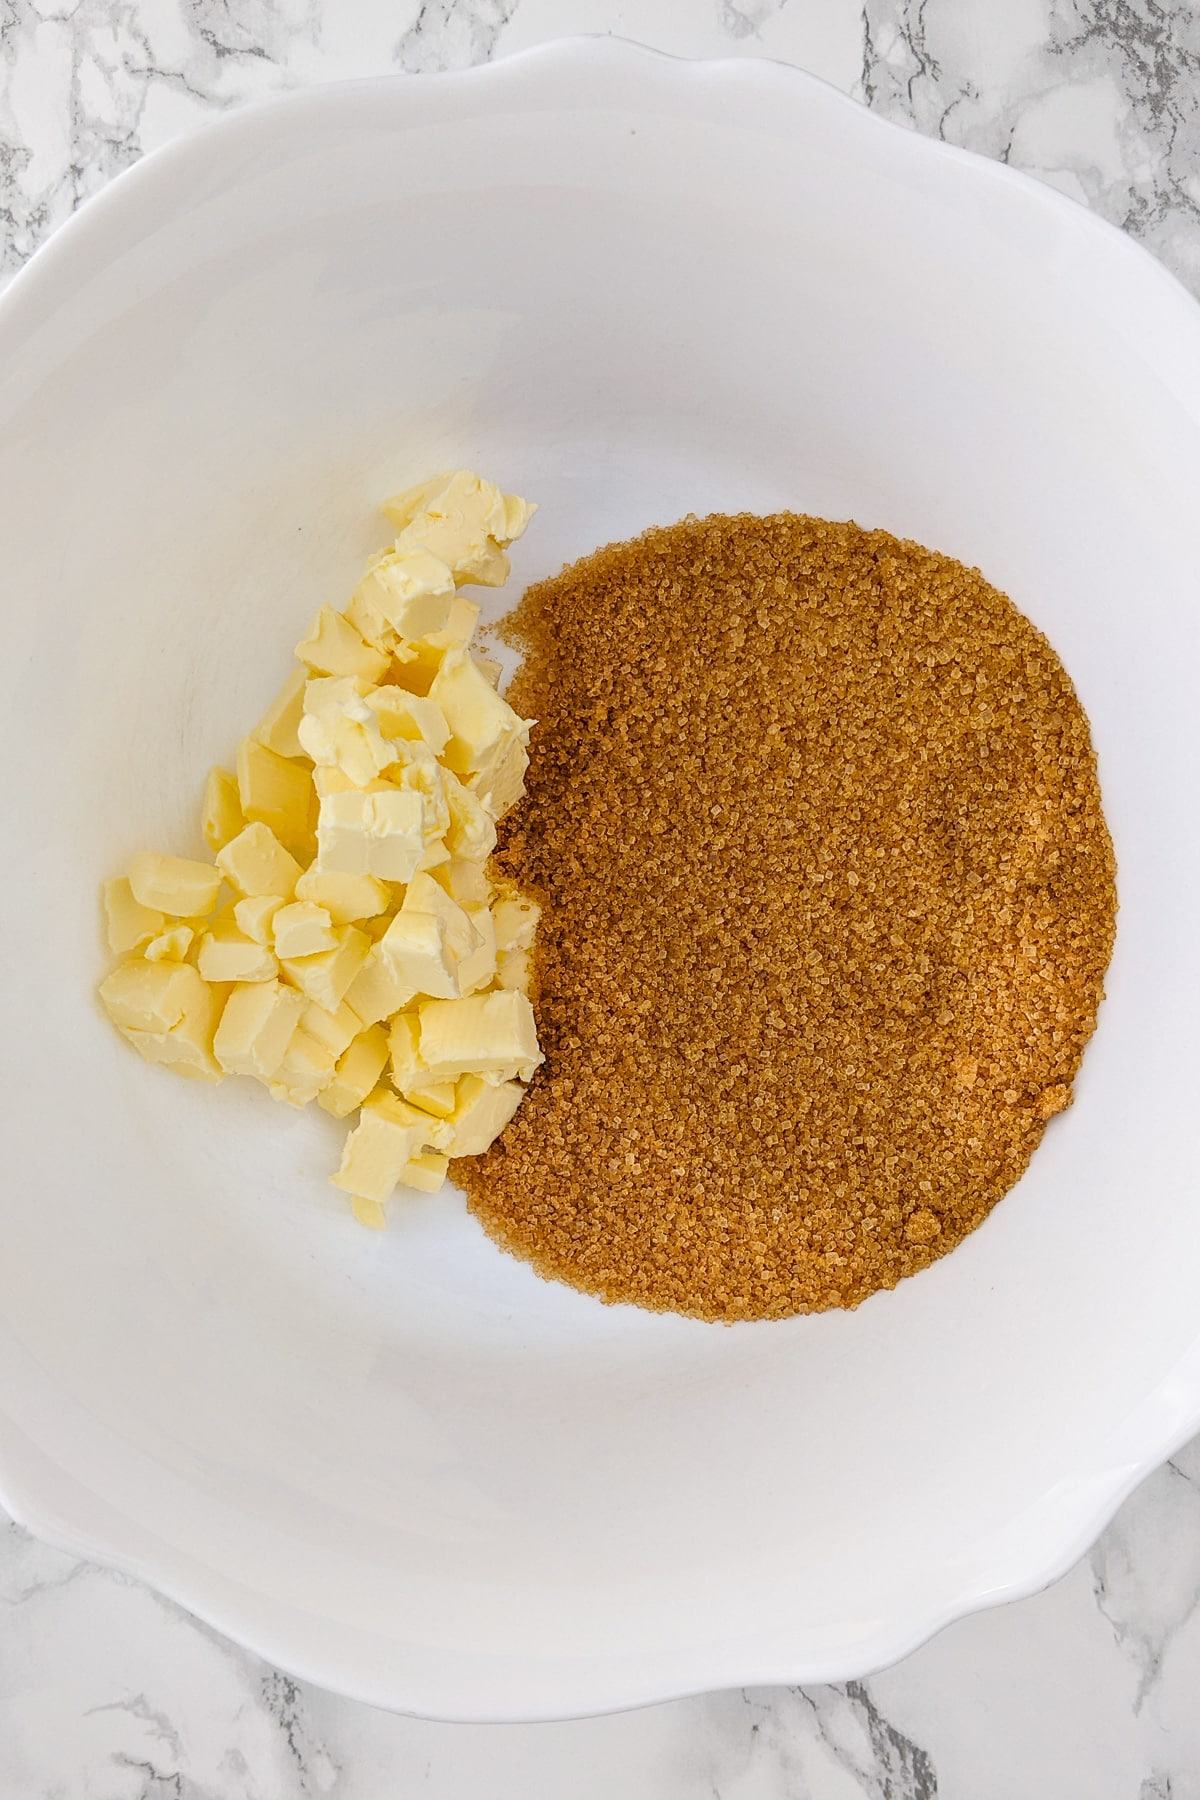 Top view of a plate with butter and brown sugar.